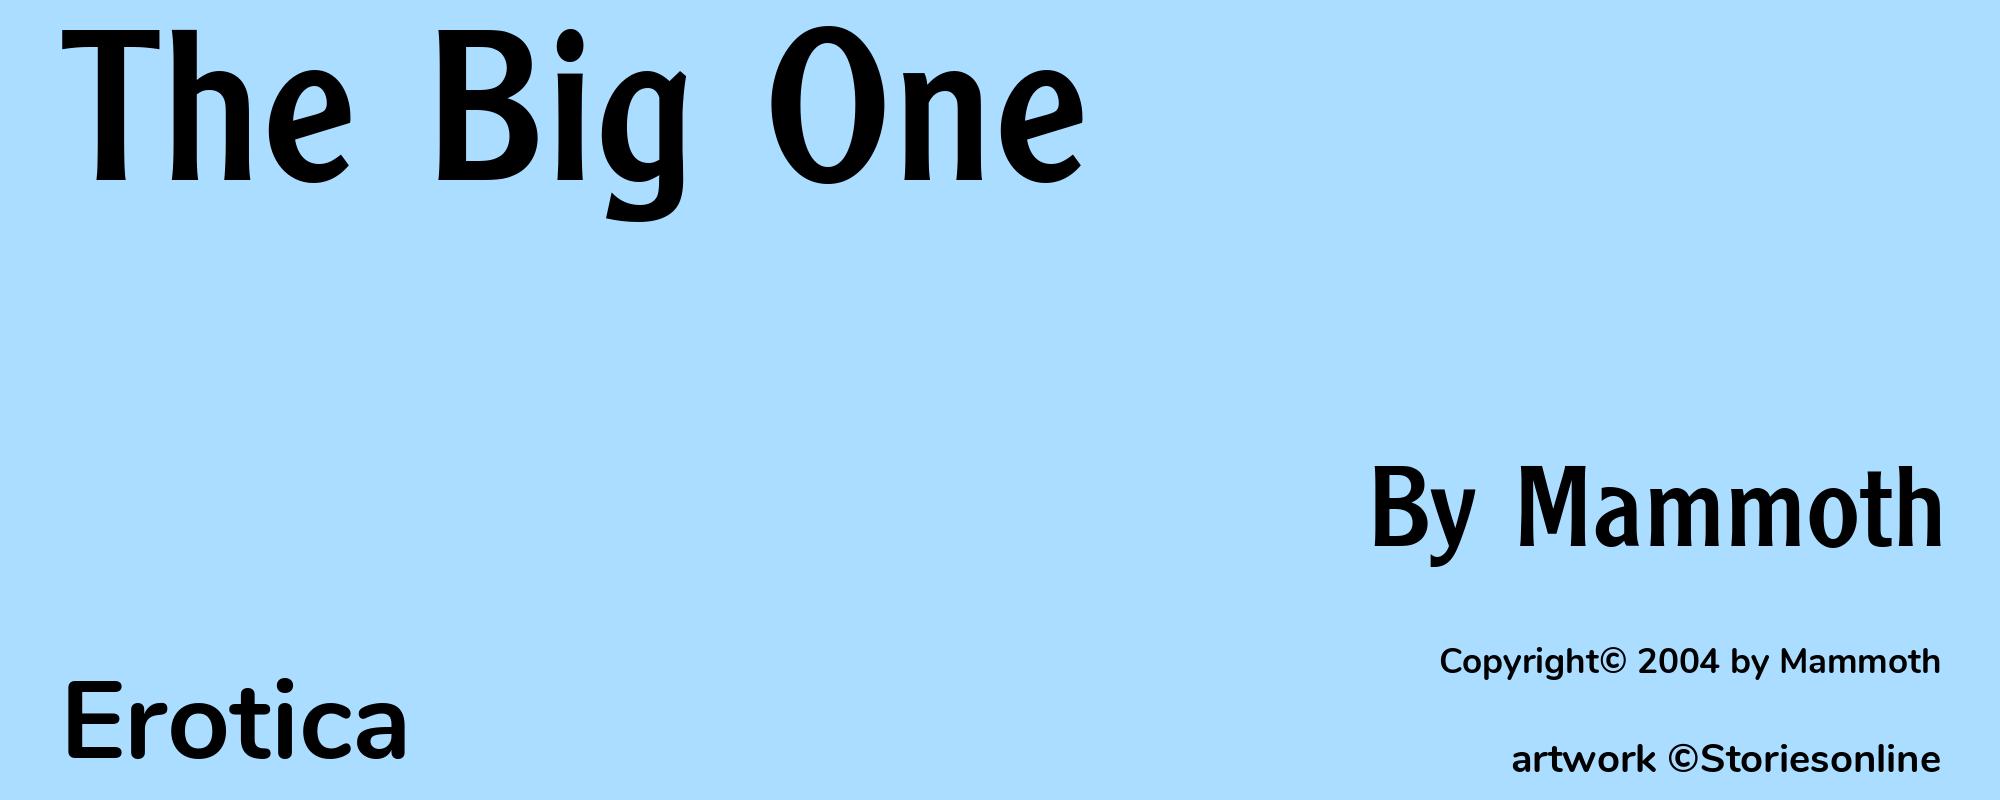 The Big One - Cover